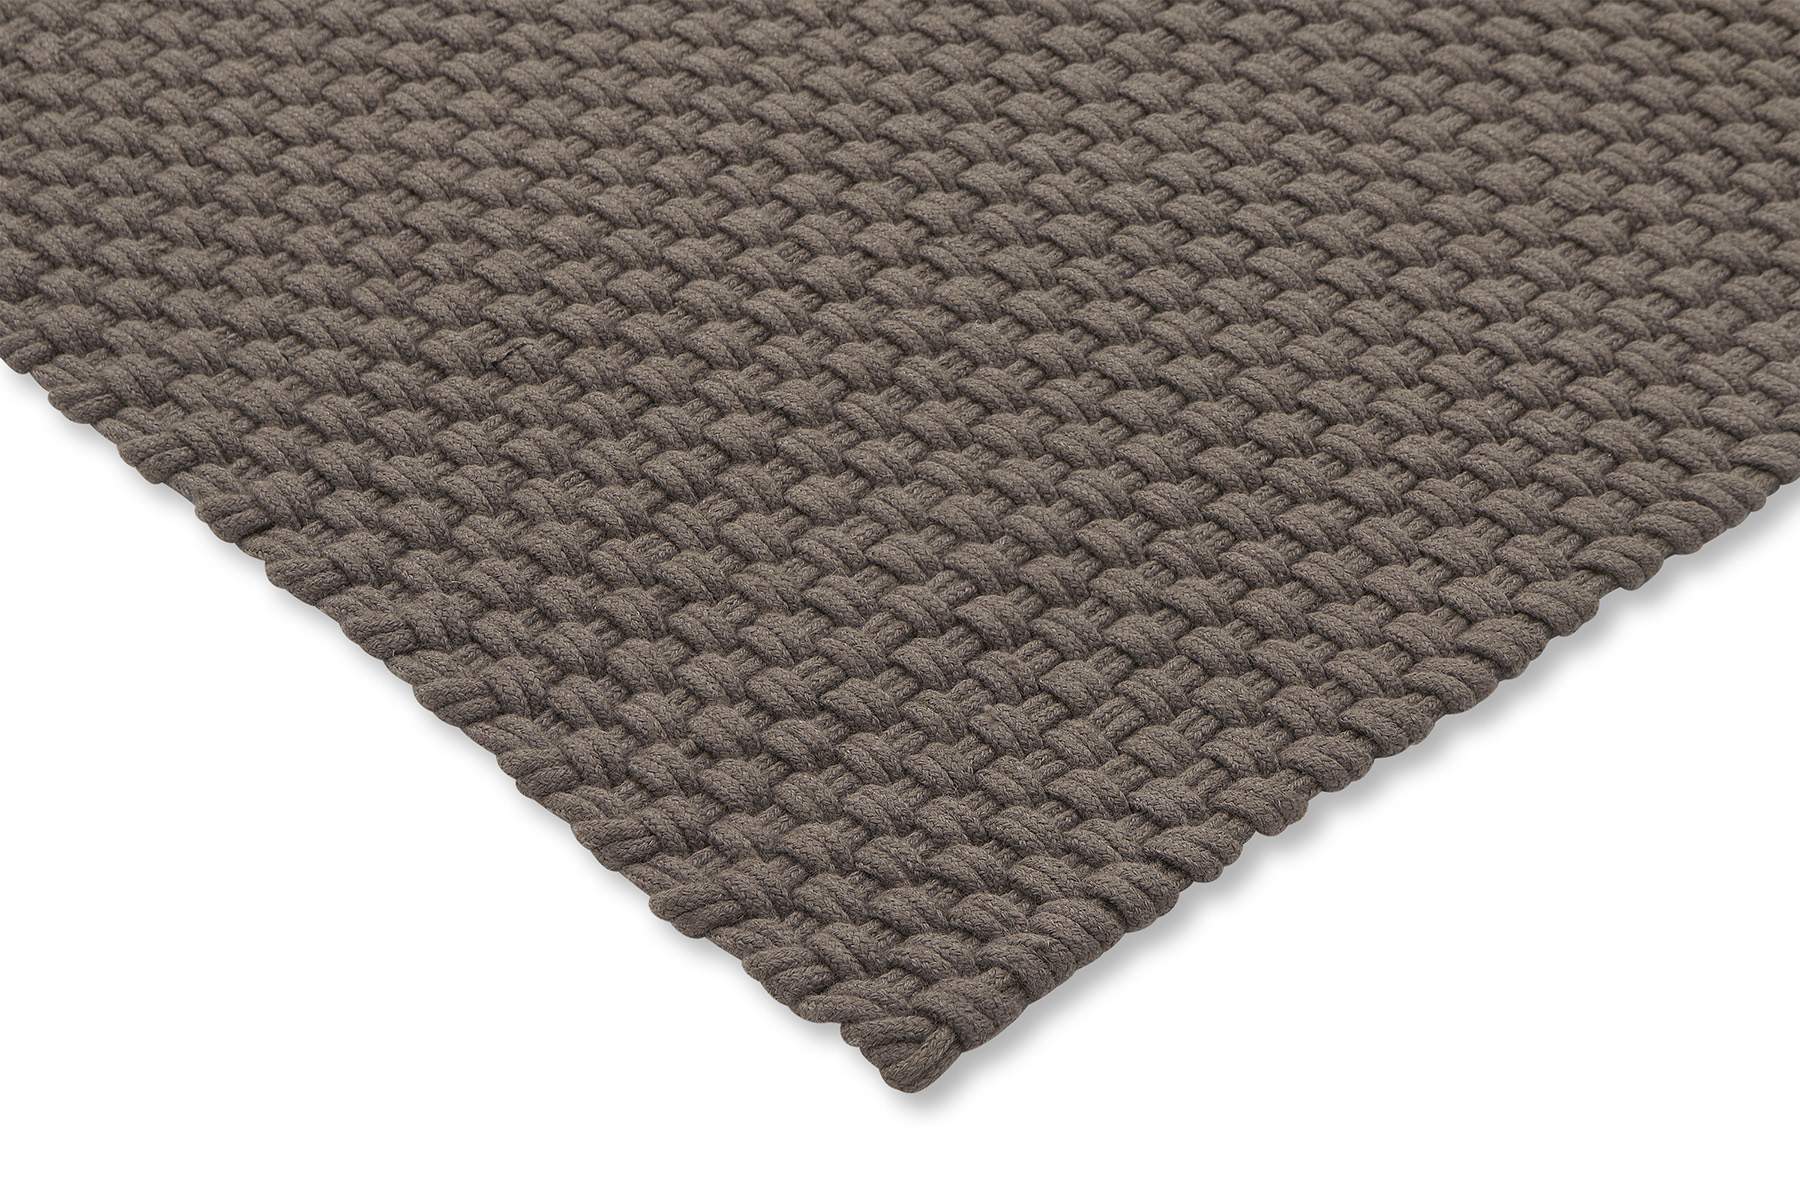 Grey / Taupe Outdoor Handwoven Rug